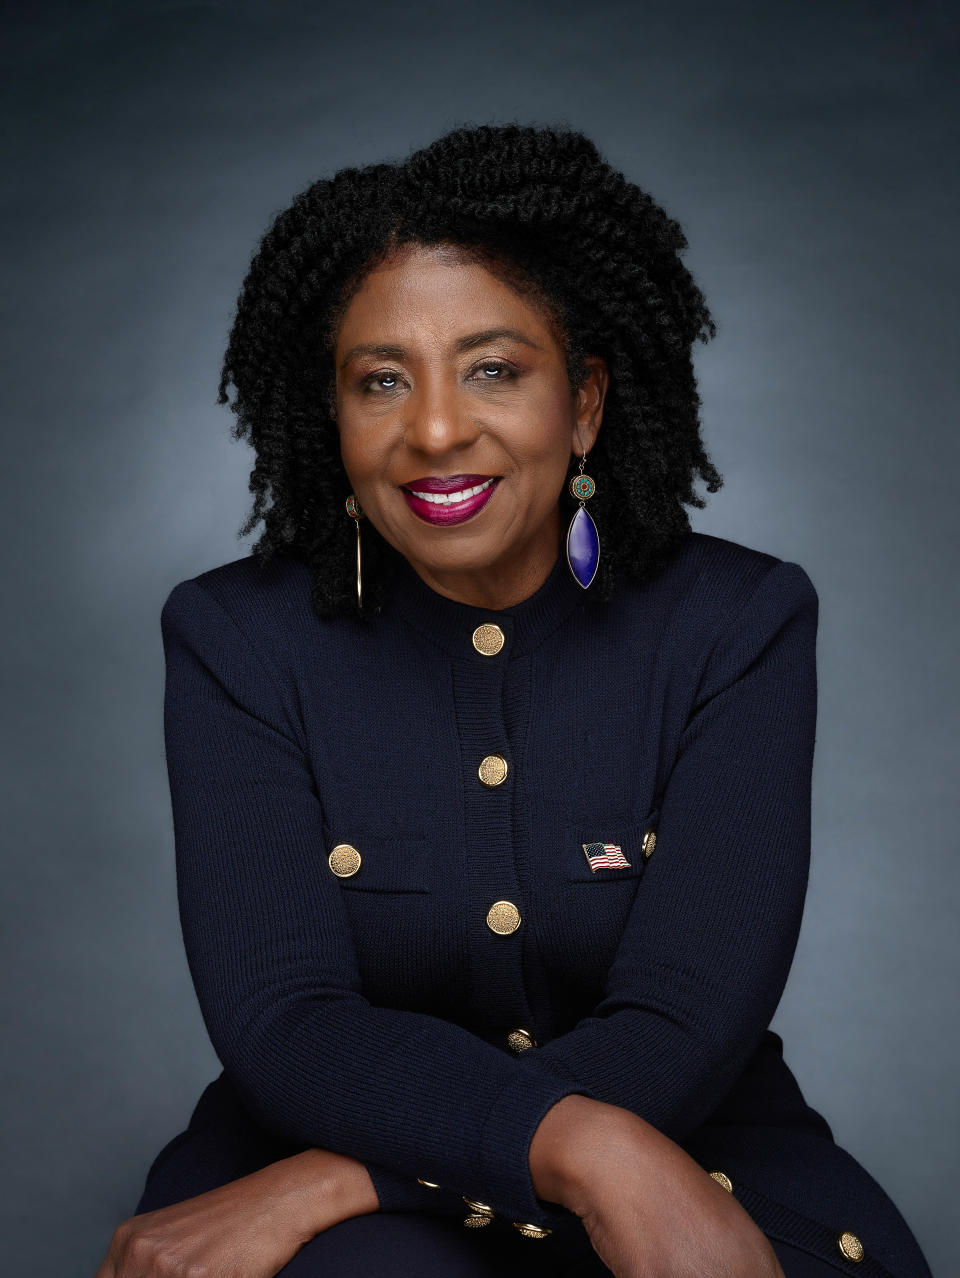 Valerie McCray is running as a Democrat in the U.S. Senate primary. The winner of the May election will face Republican U.S. Rep. Jim Banks in November.